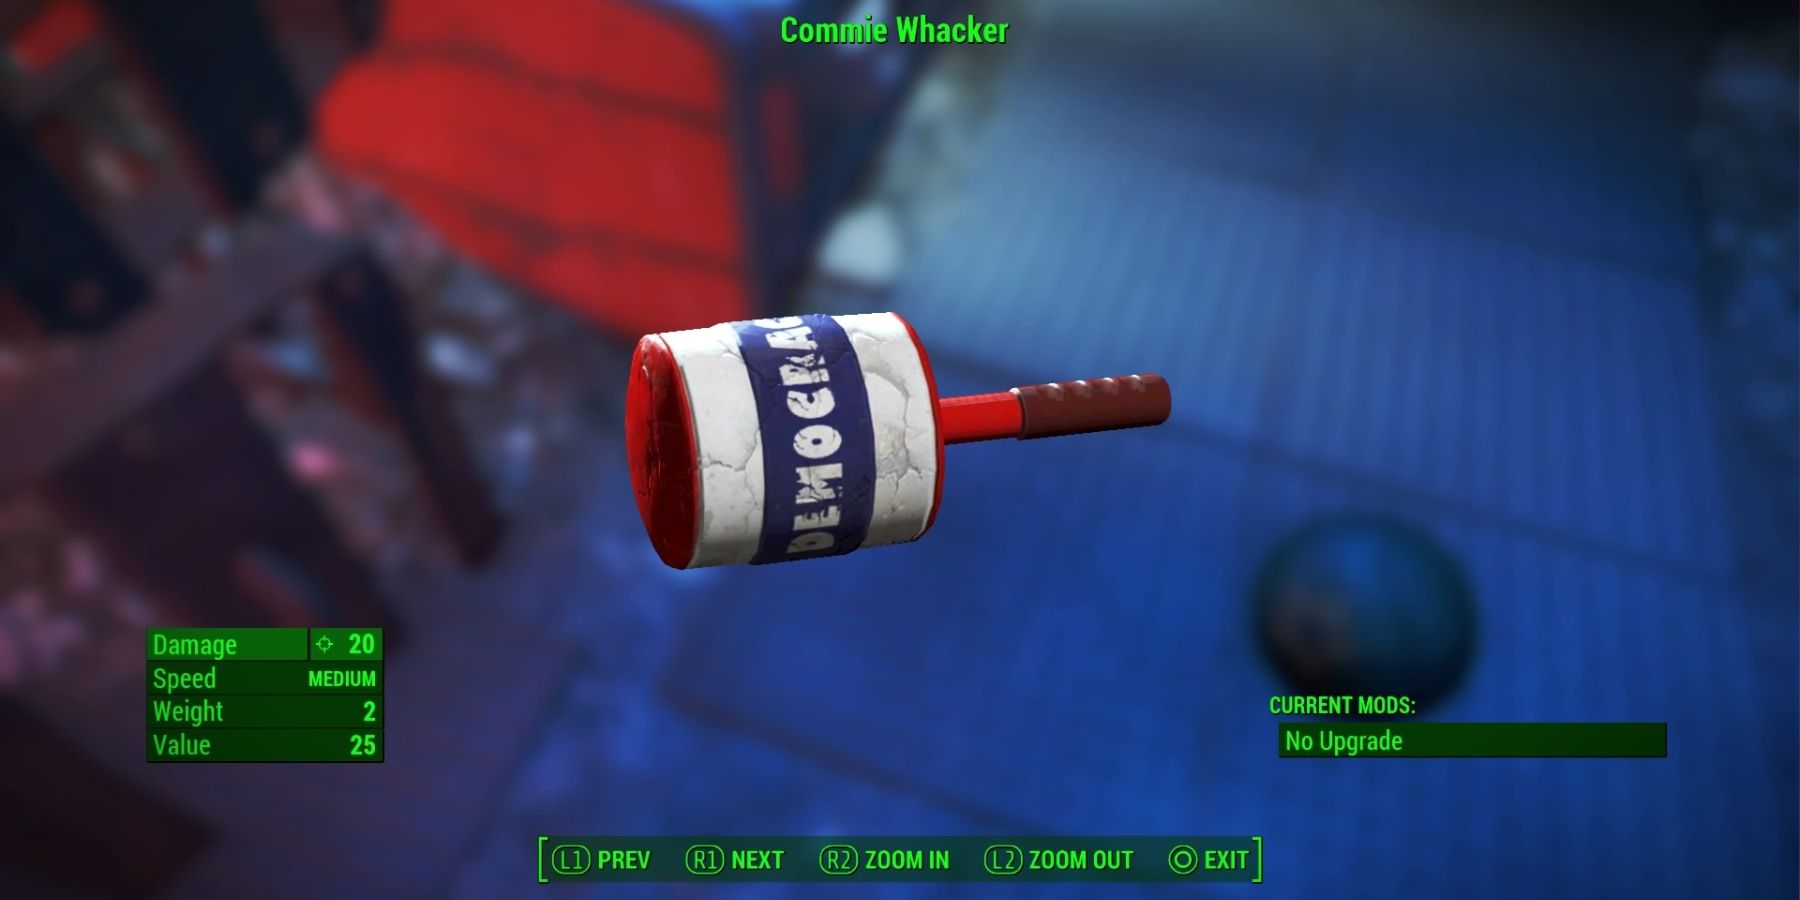 fallout 4 commie whacker